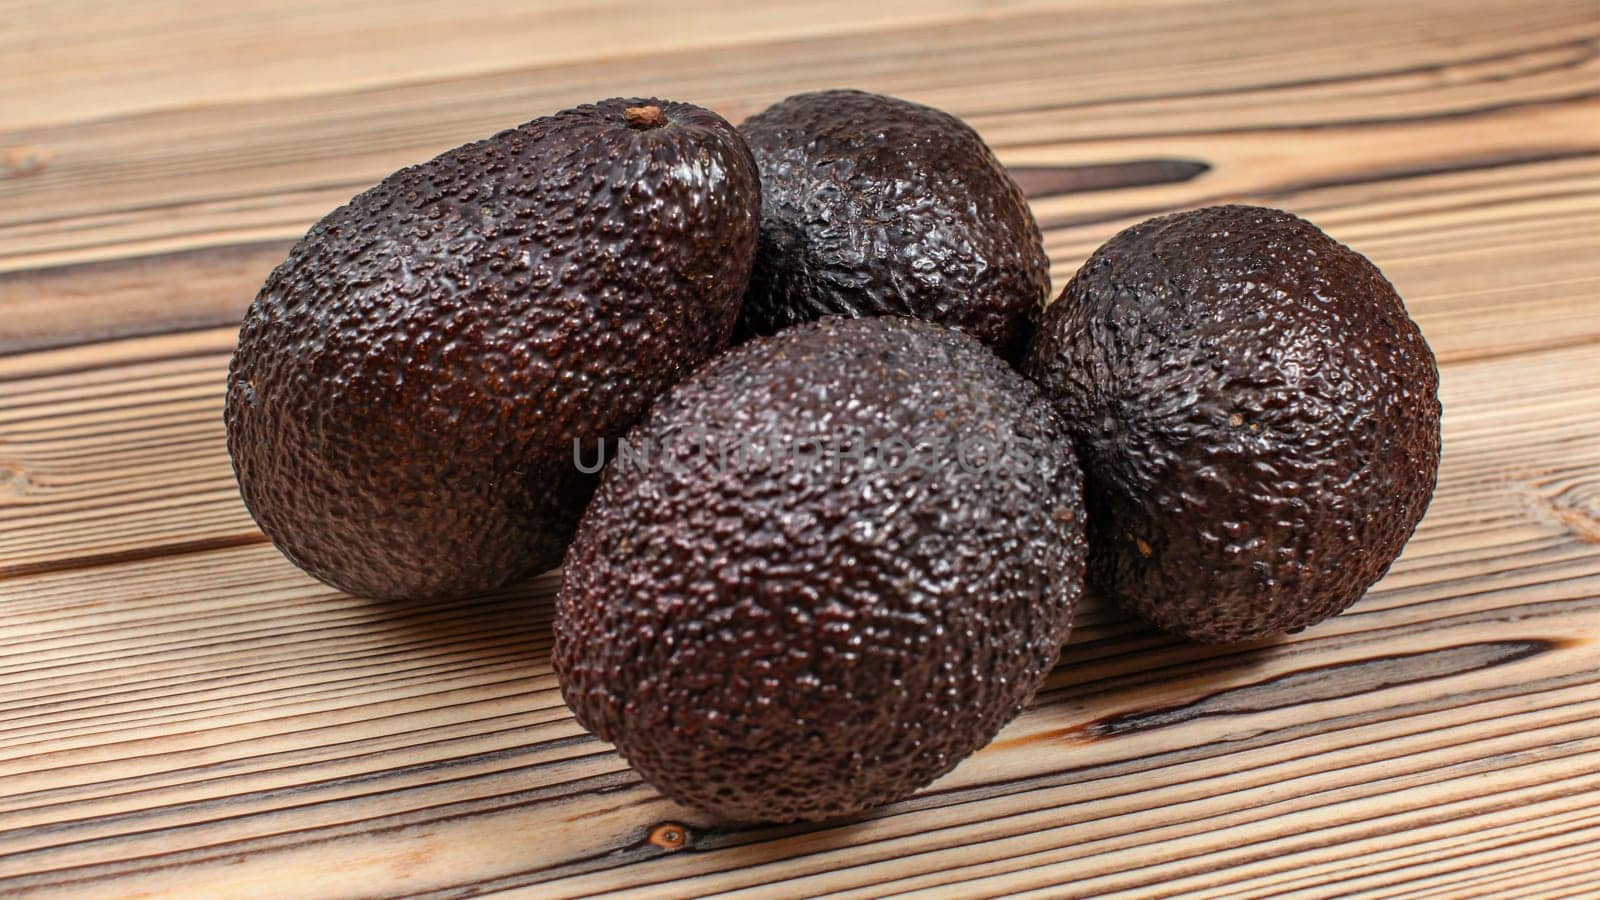 Four dark brown ripe avocados on wooden boards table.